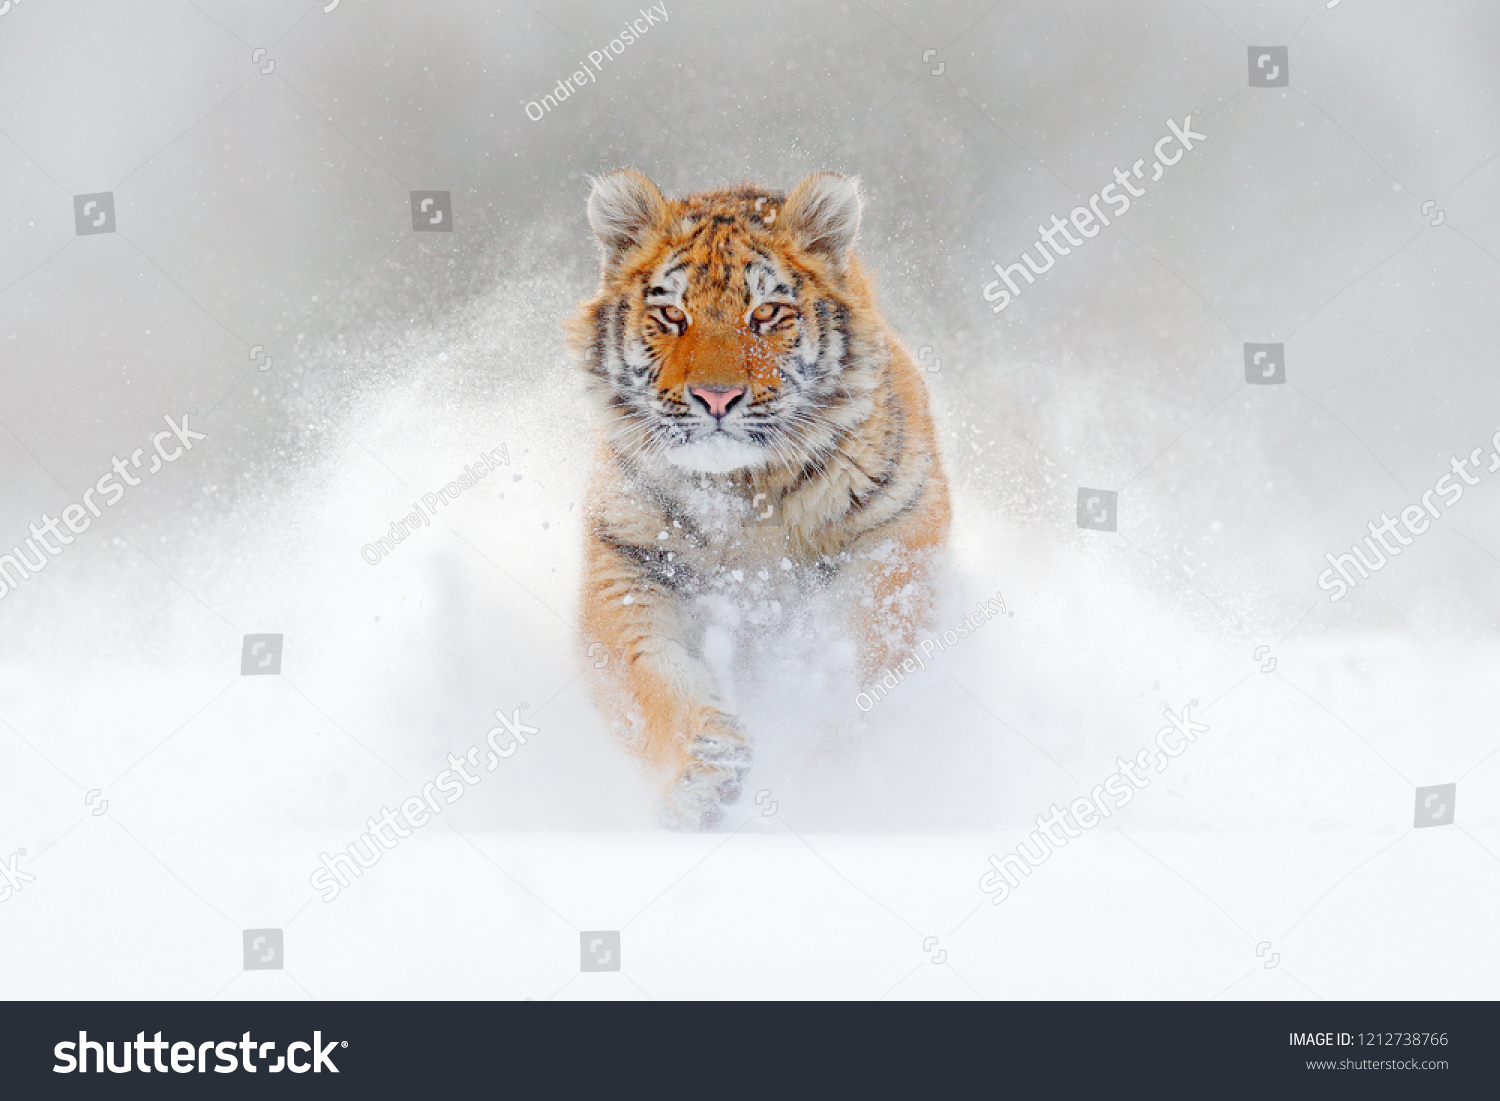 Tiger running in the snow, wild winter nature. Siberian Amur tiger, Panthera tigris altaica, wildlife scene with dangerous animal. Cold winter in taiga, Russia. White Snowflakes with wild cat.  #1212738766